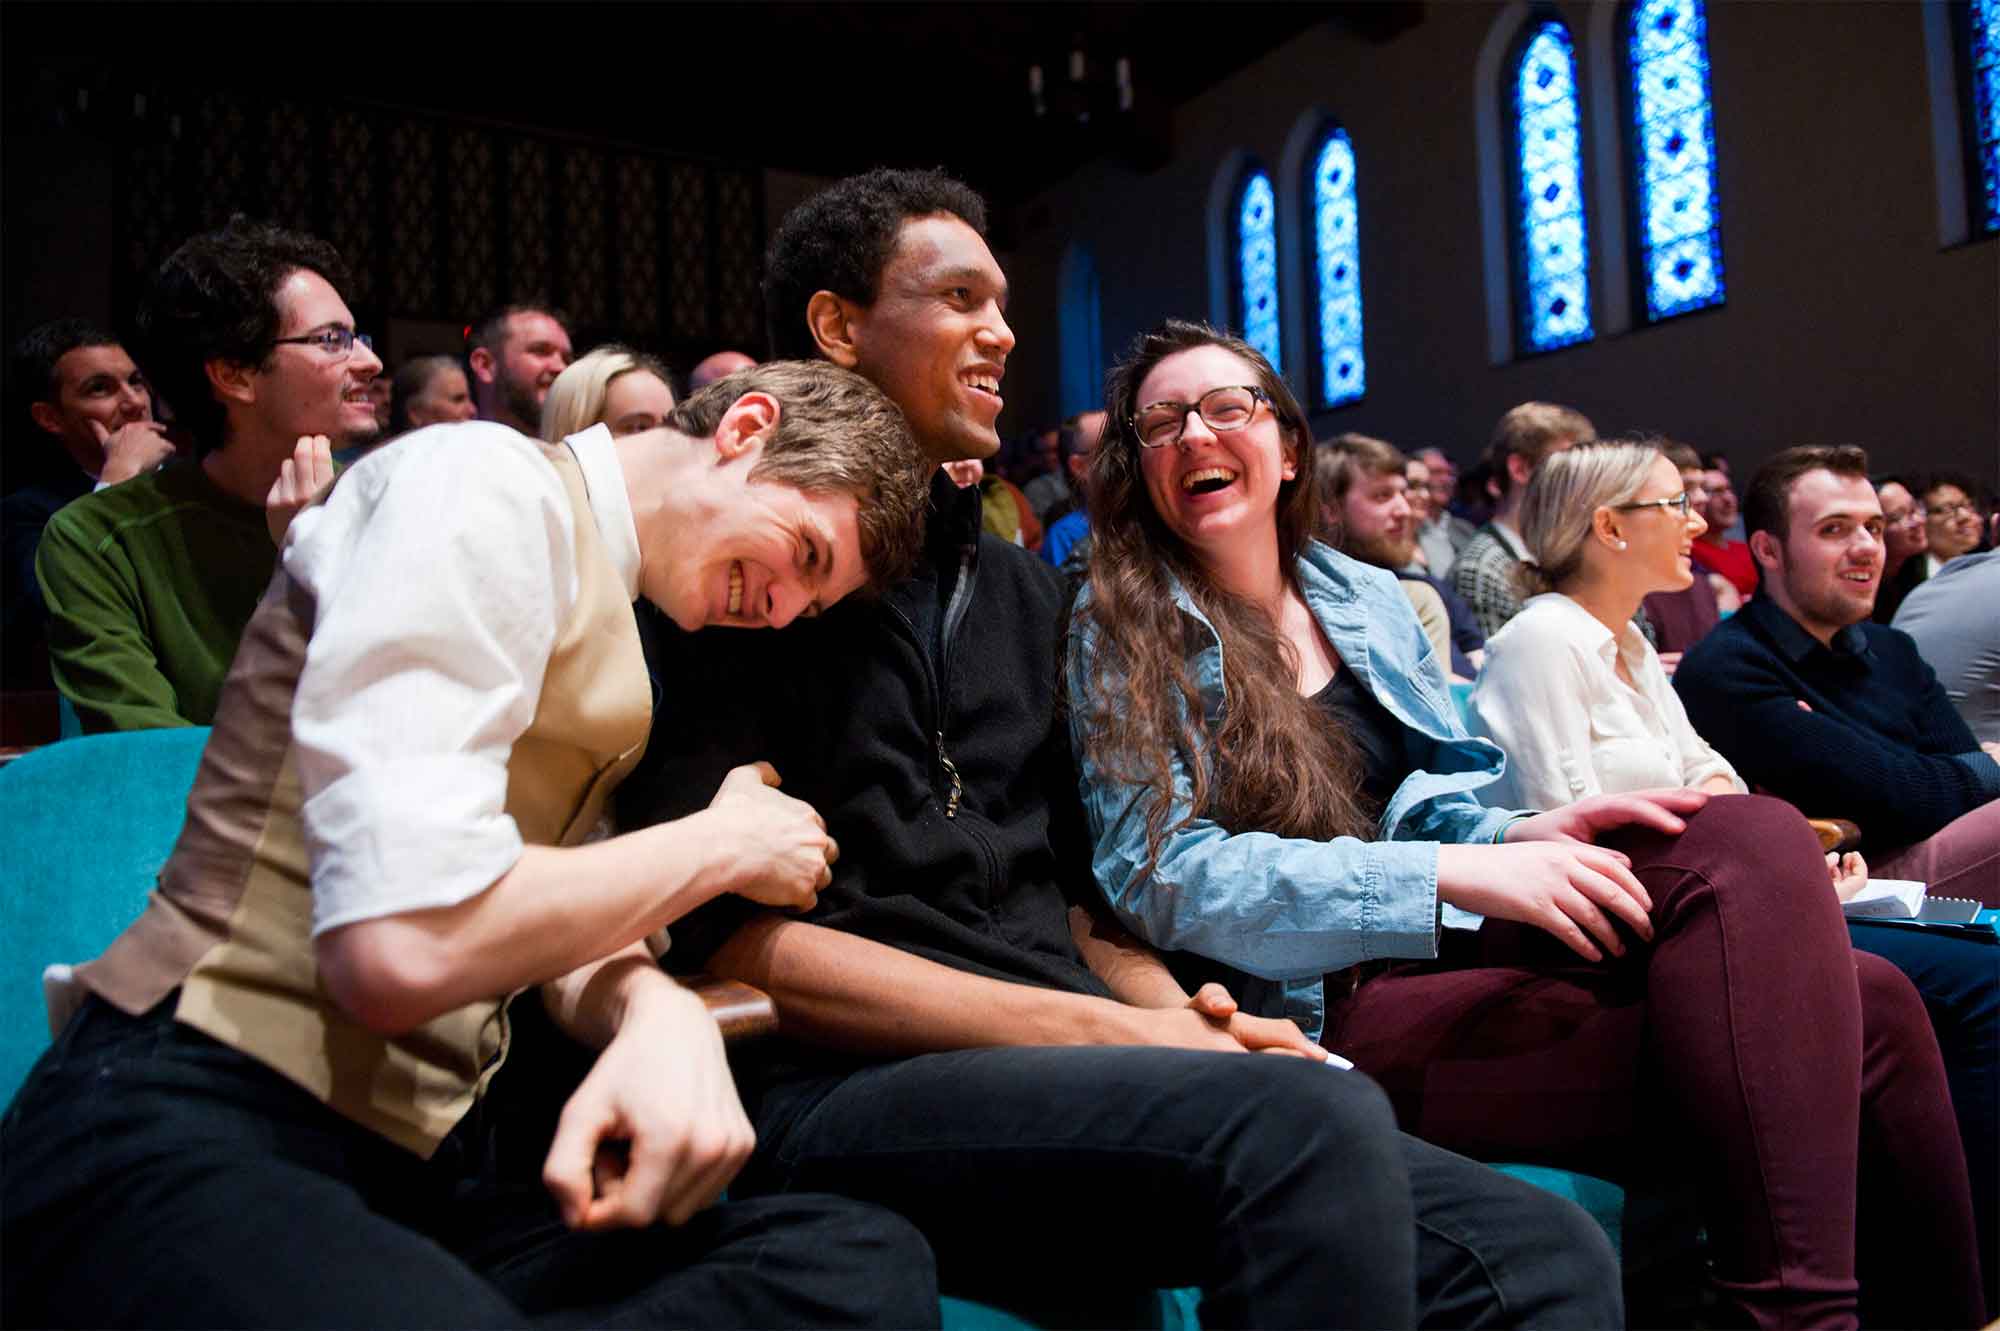 Students sit together at an event in Skinner Hall, a large room with stained-glass windows